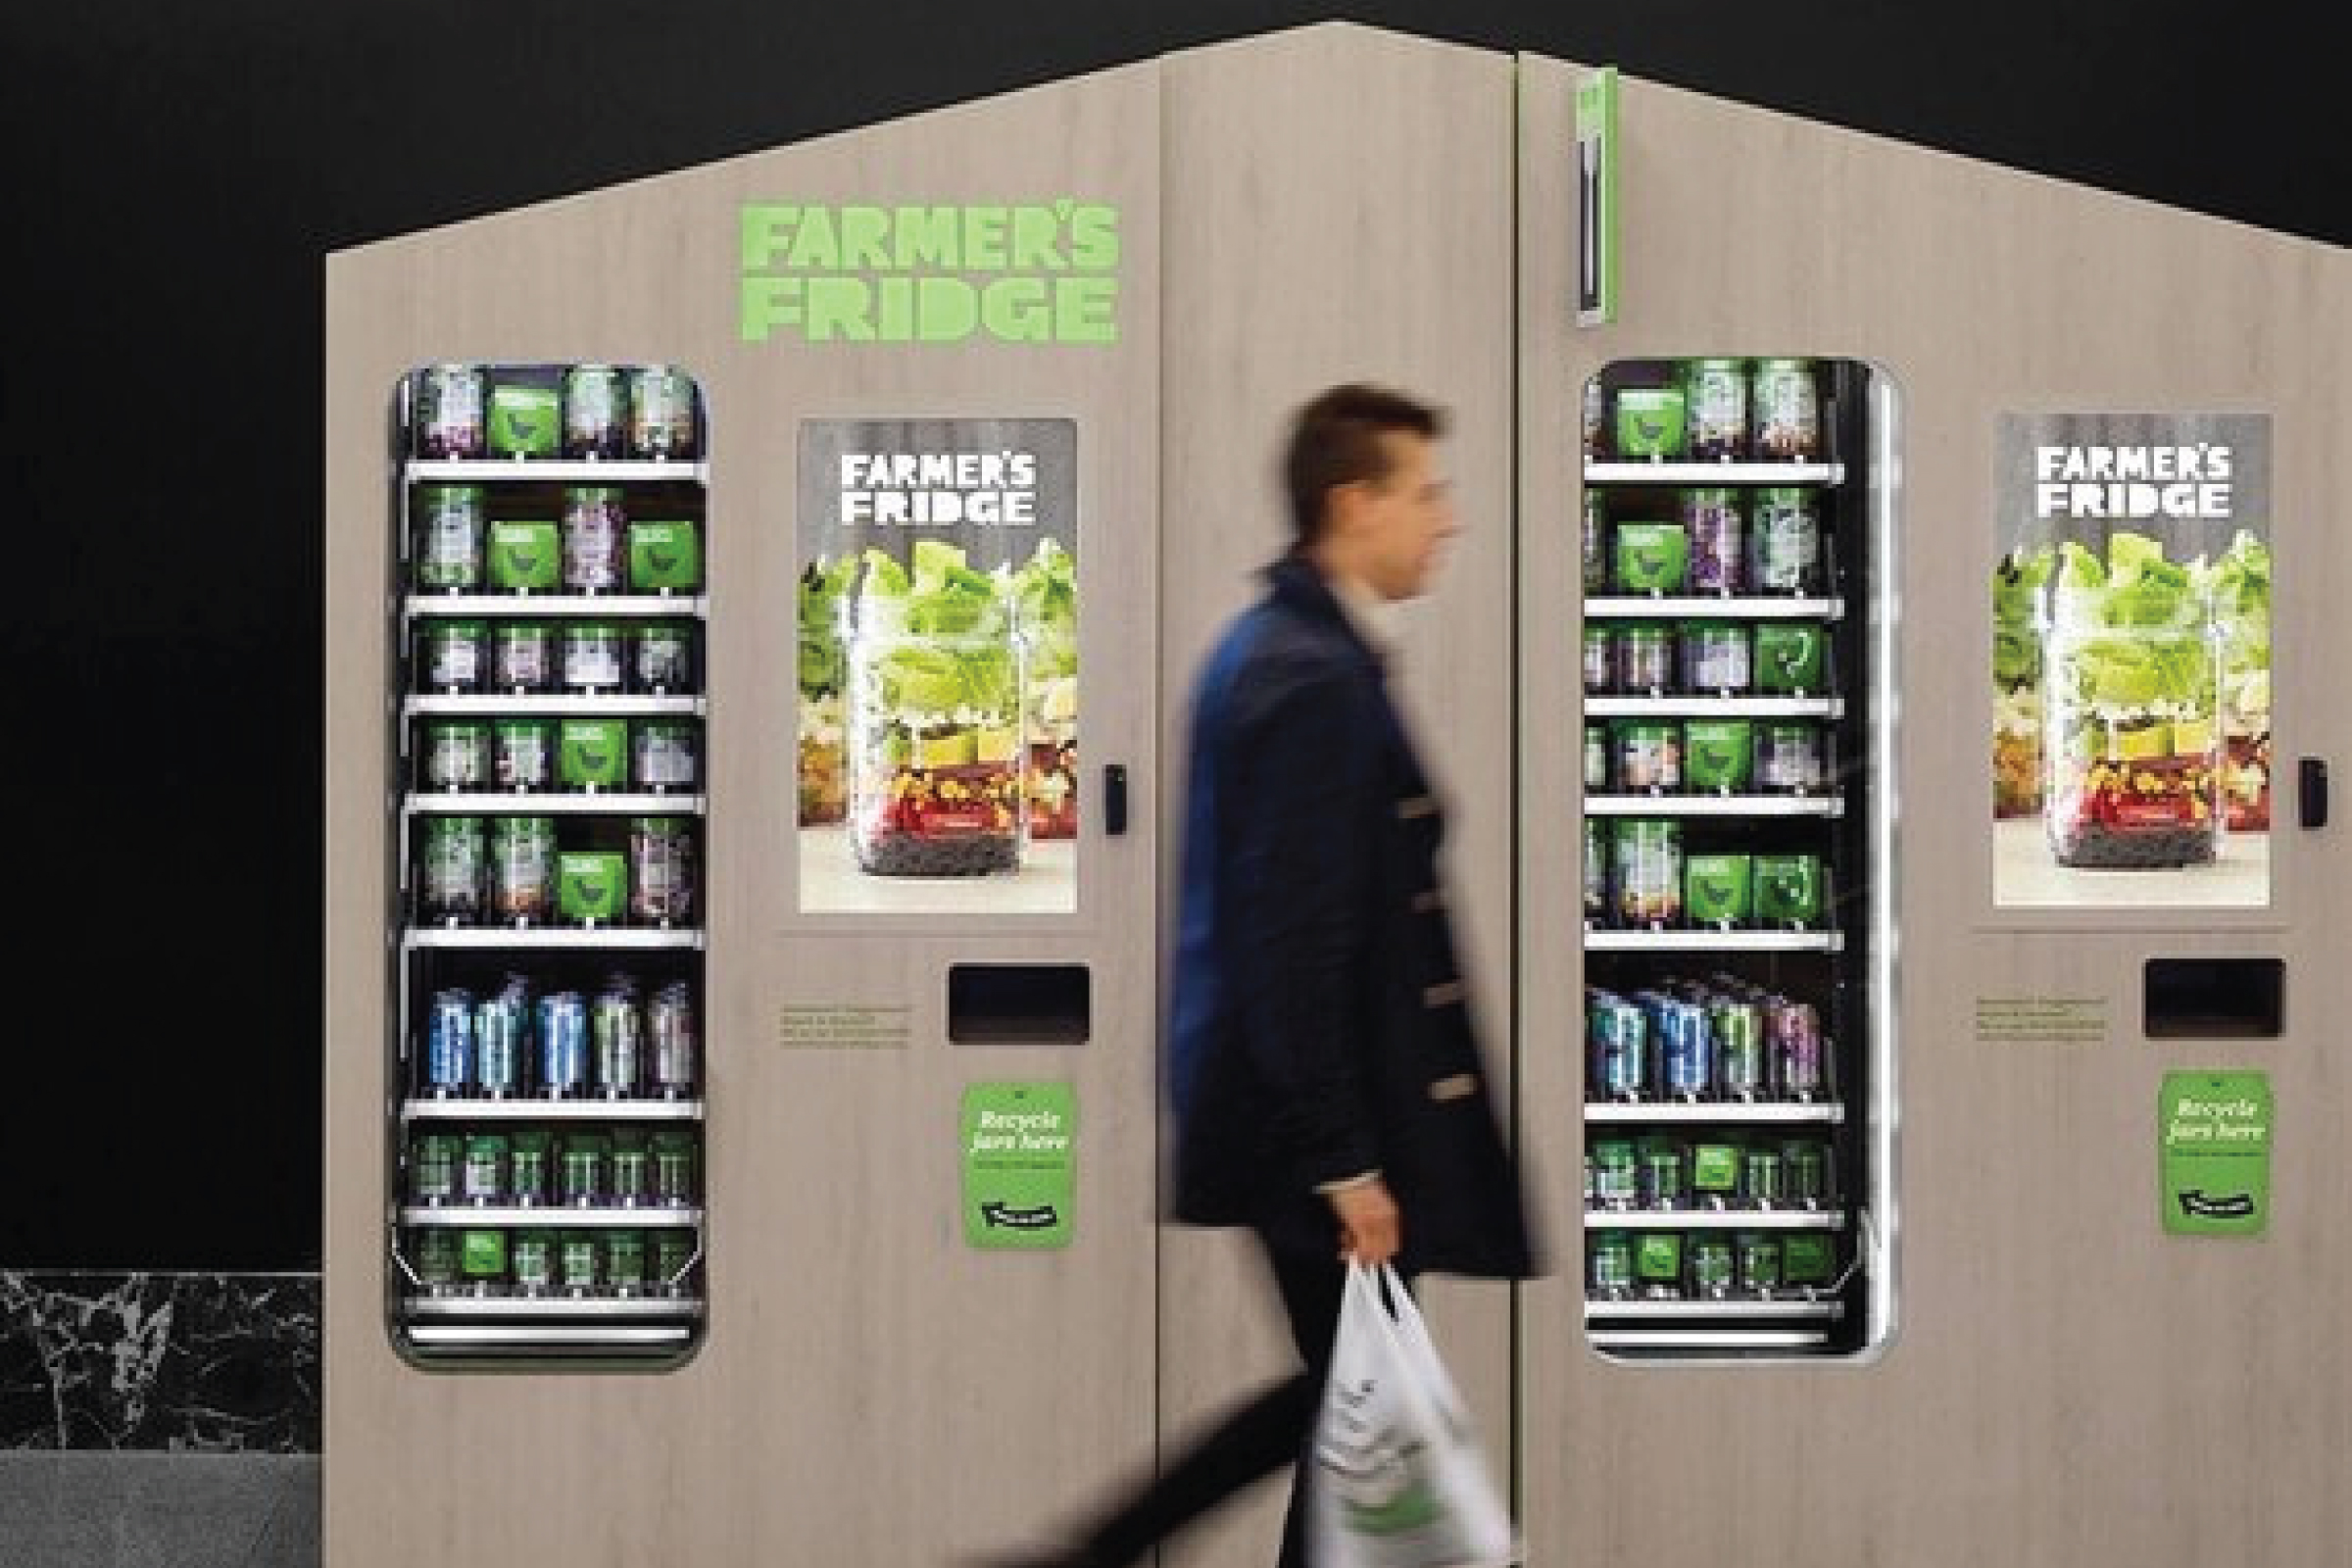 “Would you eat A salad from A vending machine?”